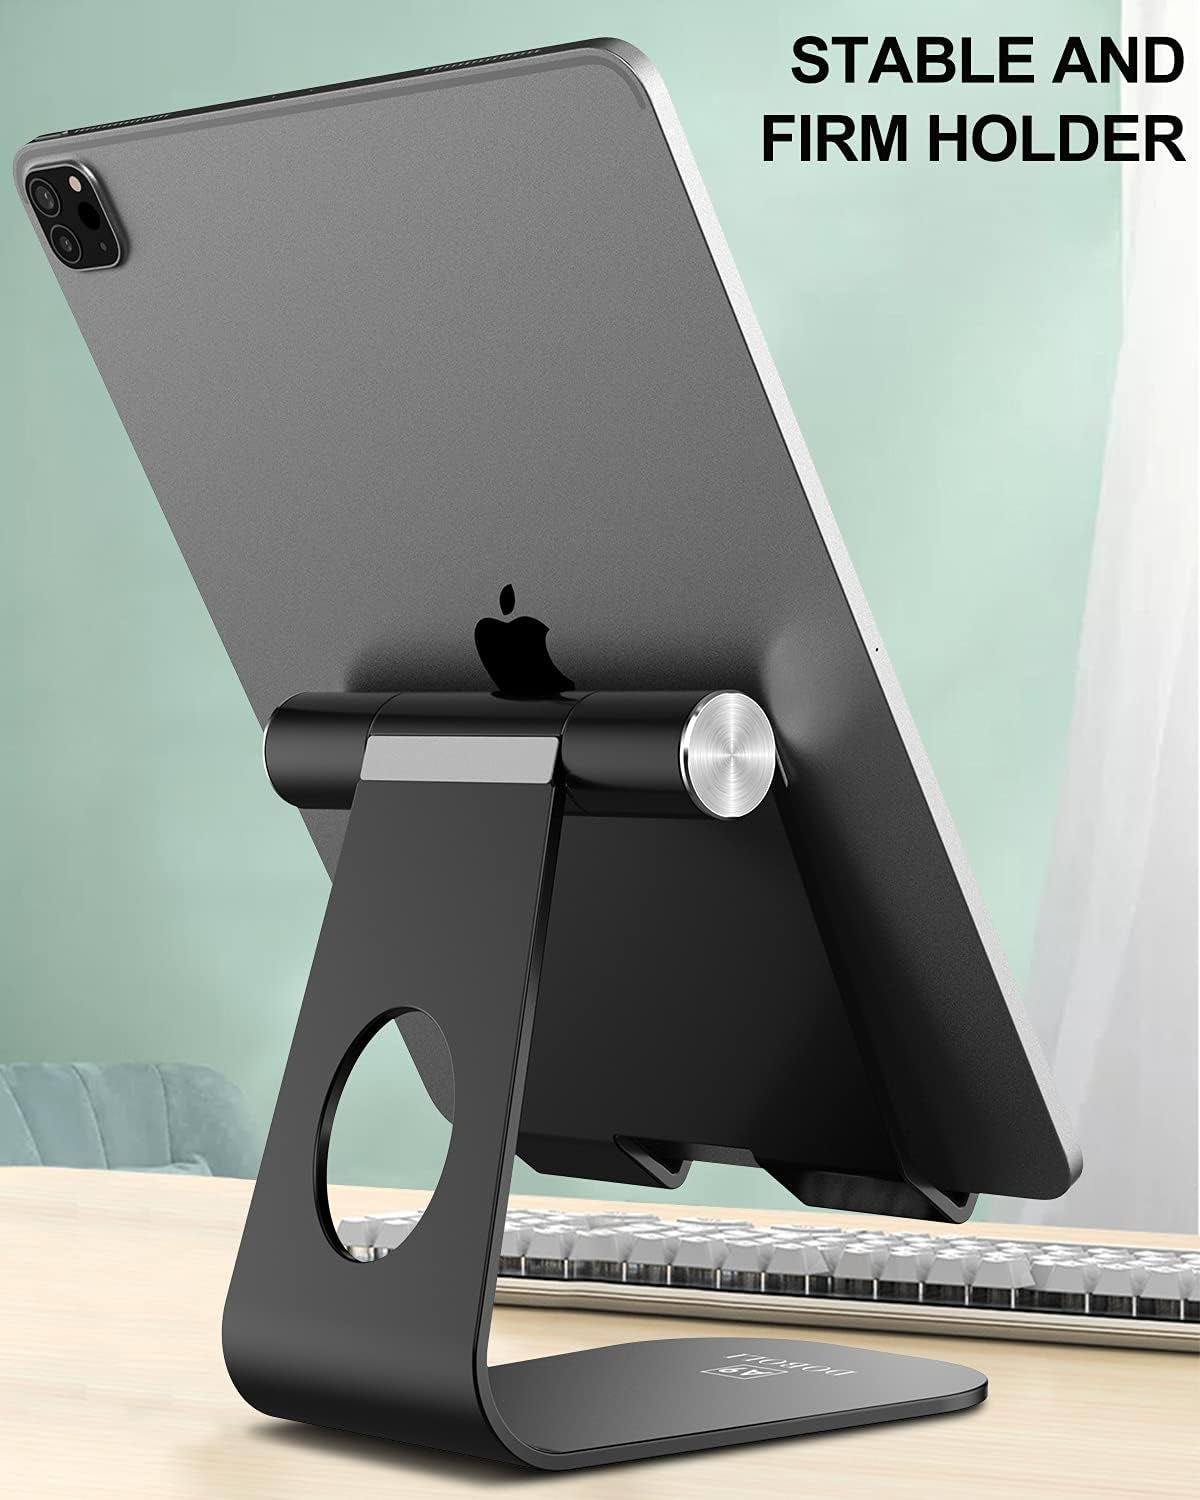 Tablet Stand Tablet Holder for Desk Adjustable Stand Foldable Tablet Holder Compatible with Ipad Galaxy Tab Iphone Kindle Black - Growing Apex Tech